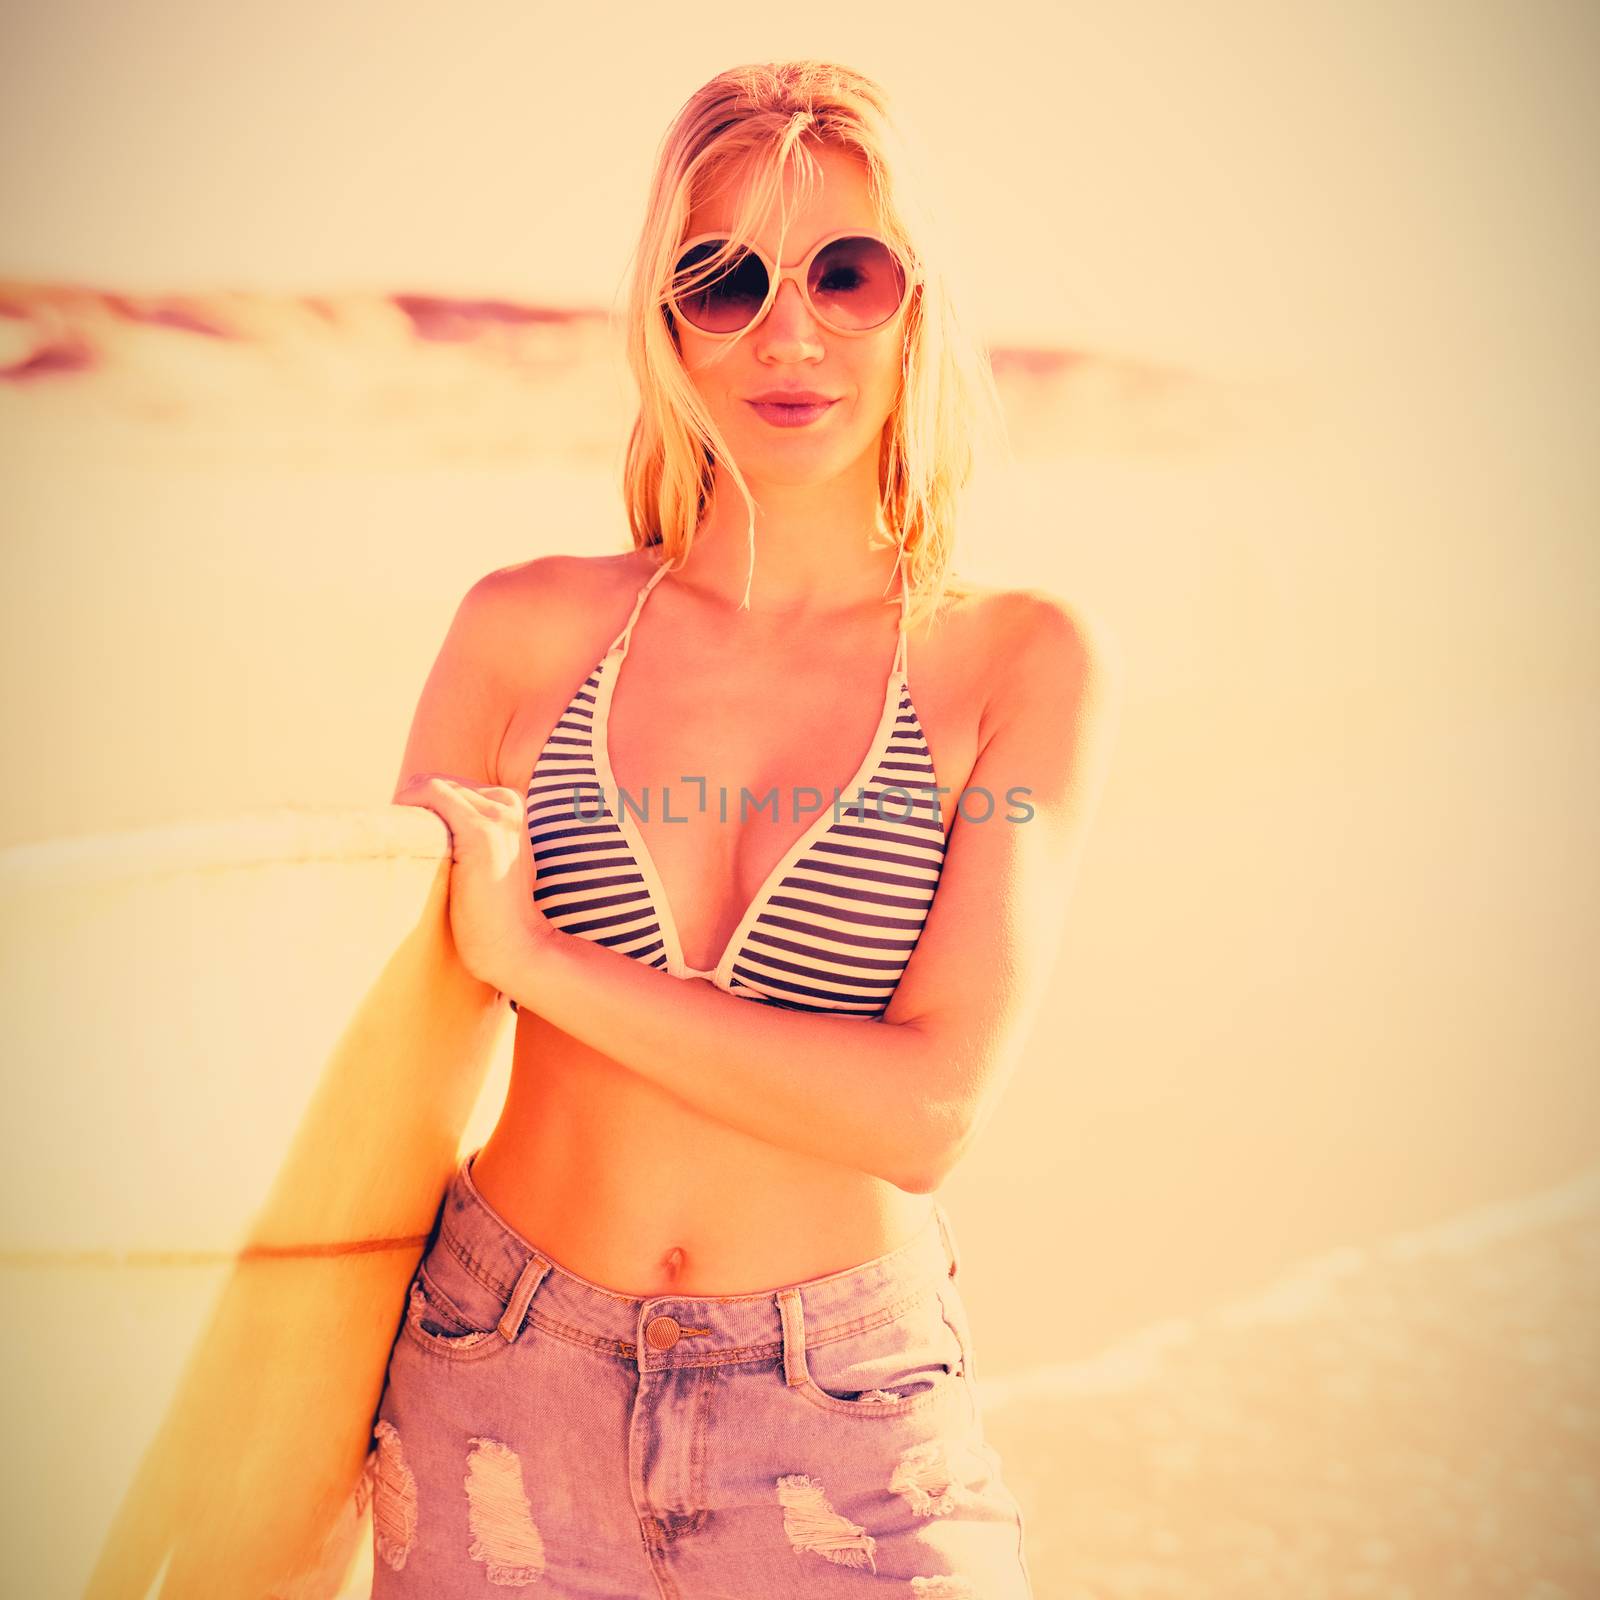 Portrait of young woman holding surfboard at beach by Wavebreakmedia